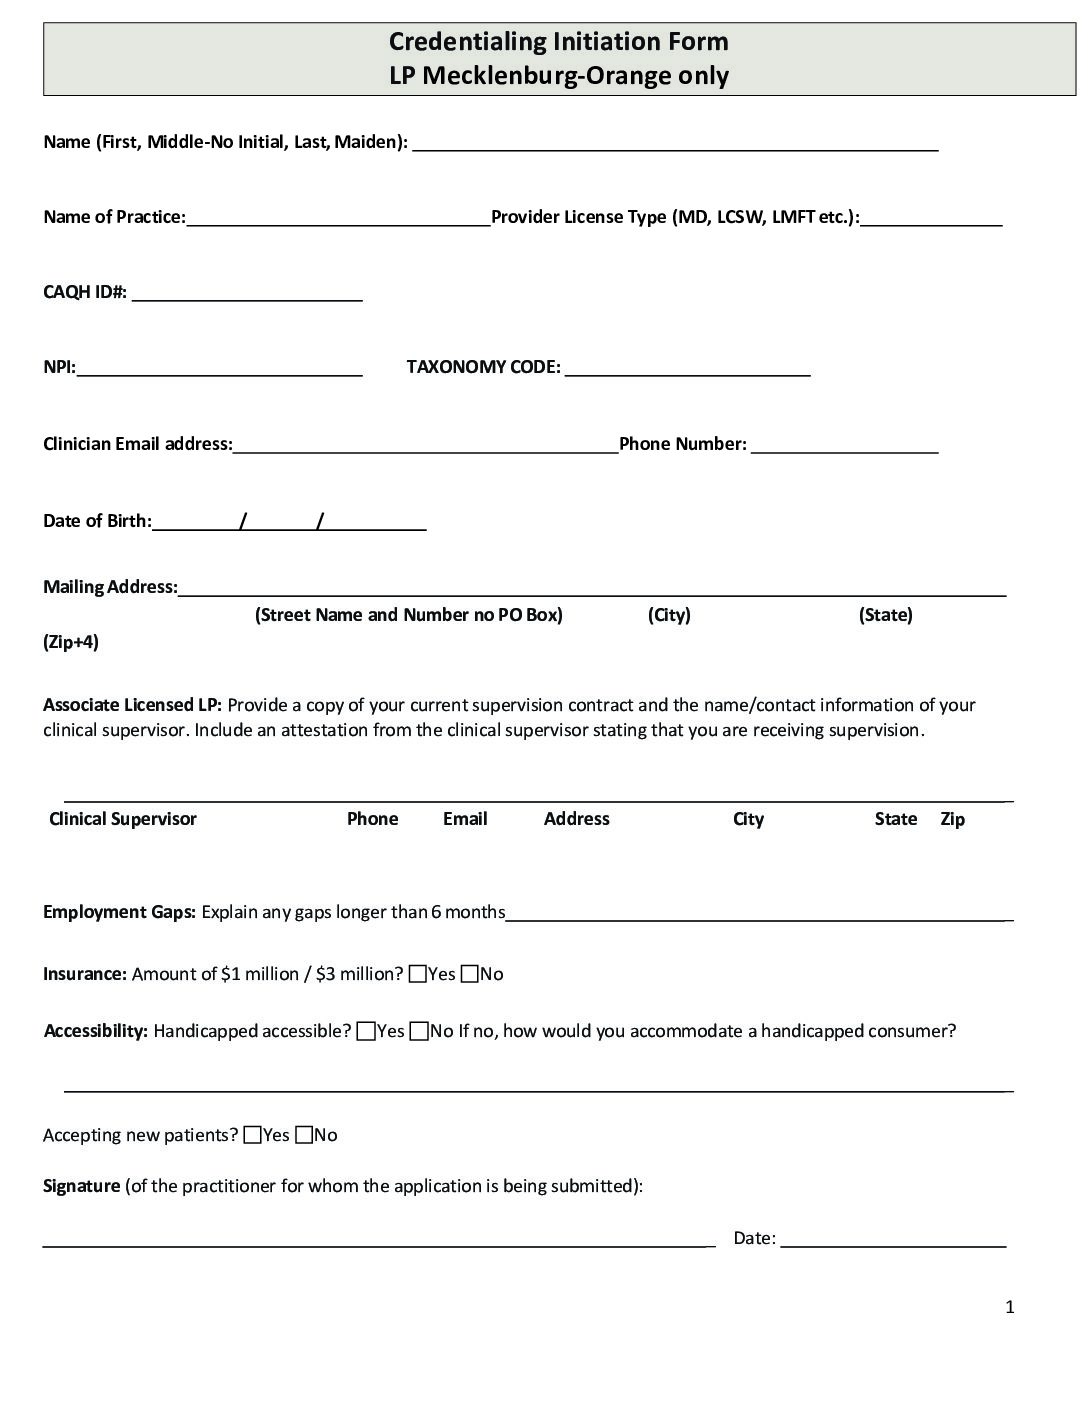 Credentialing Initiation Form for LPs